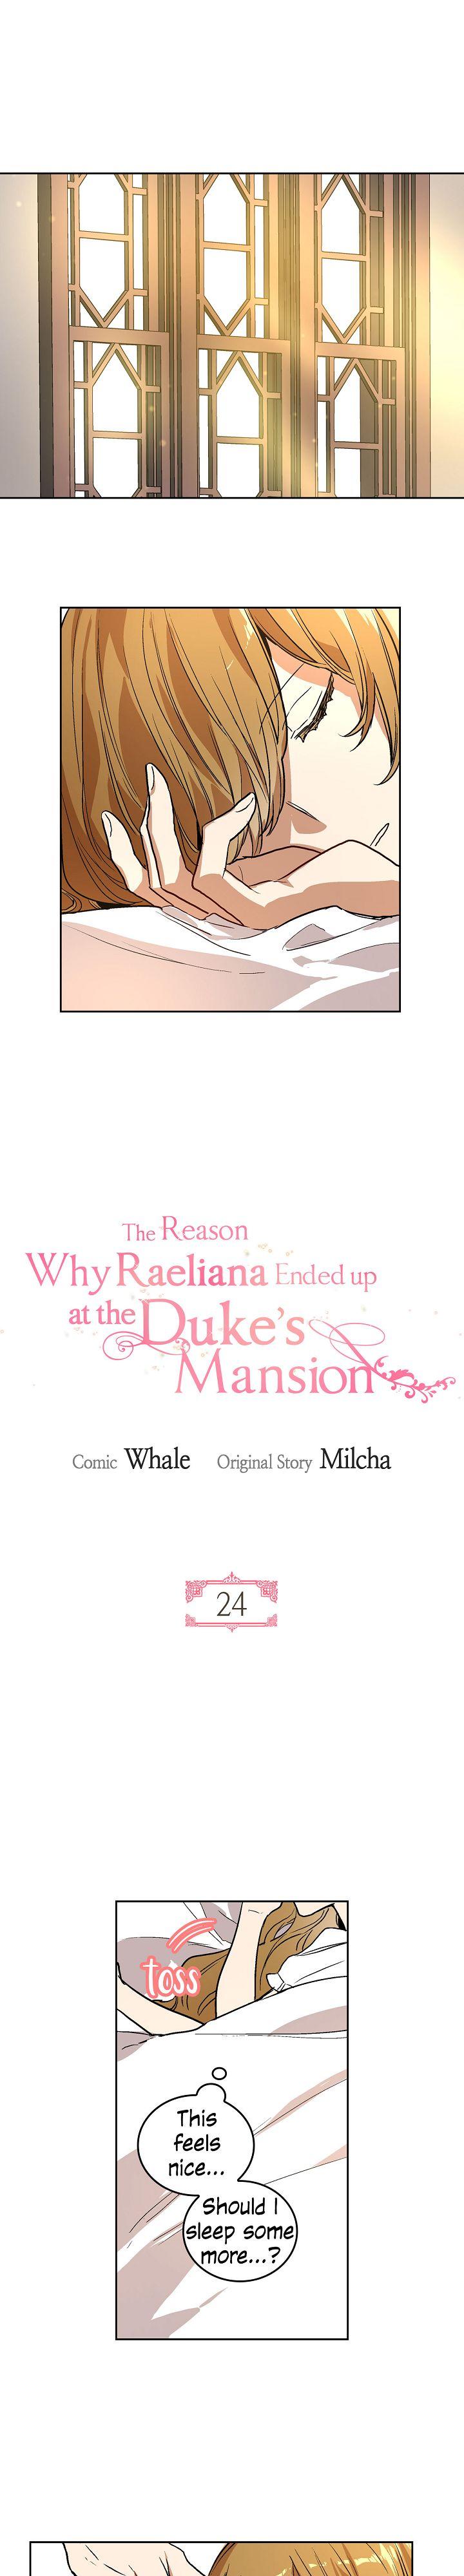 The Reason Why Raeliana Ended up at the Duke's Mansion - Chapter 24 Page 2